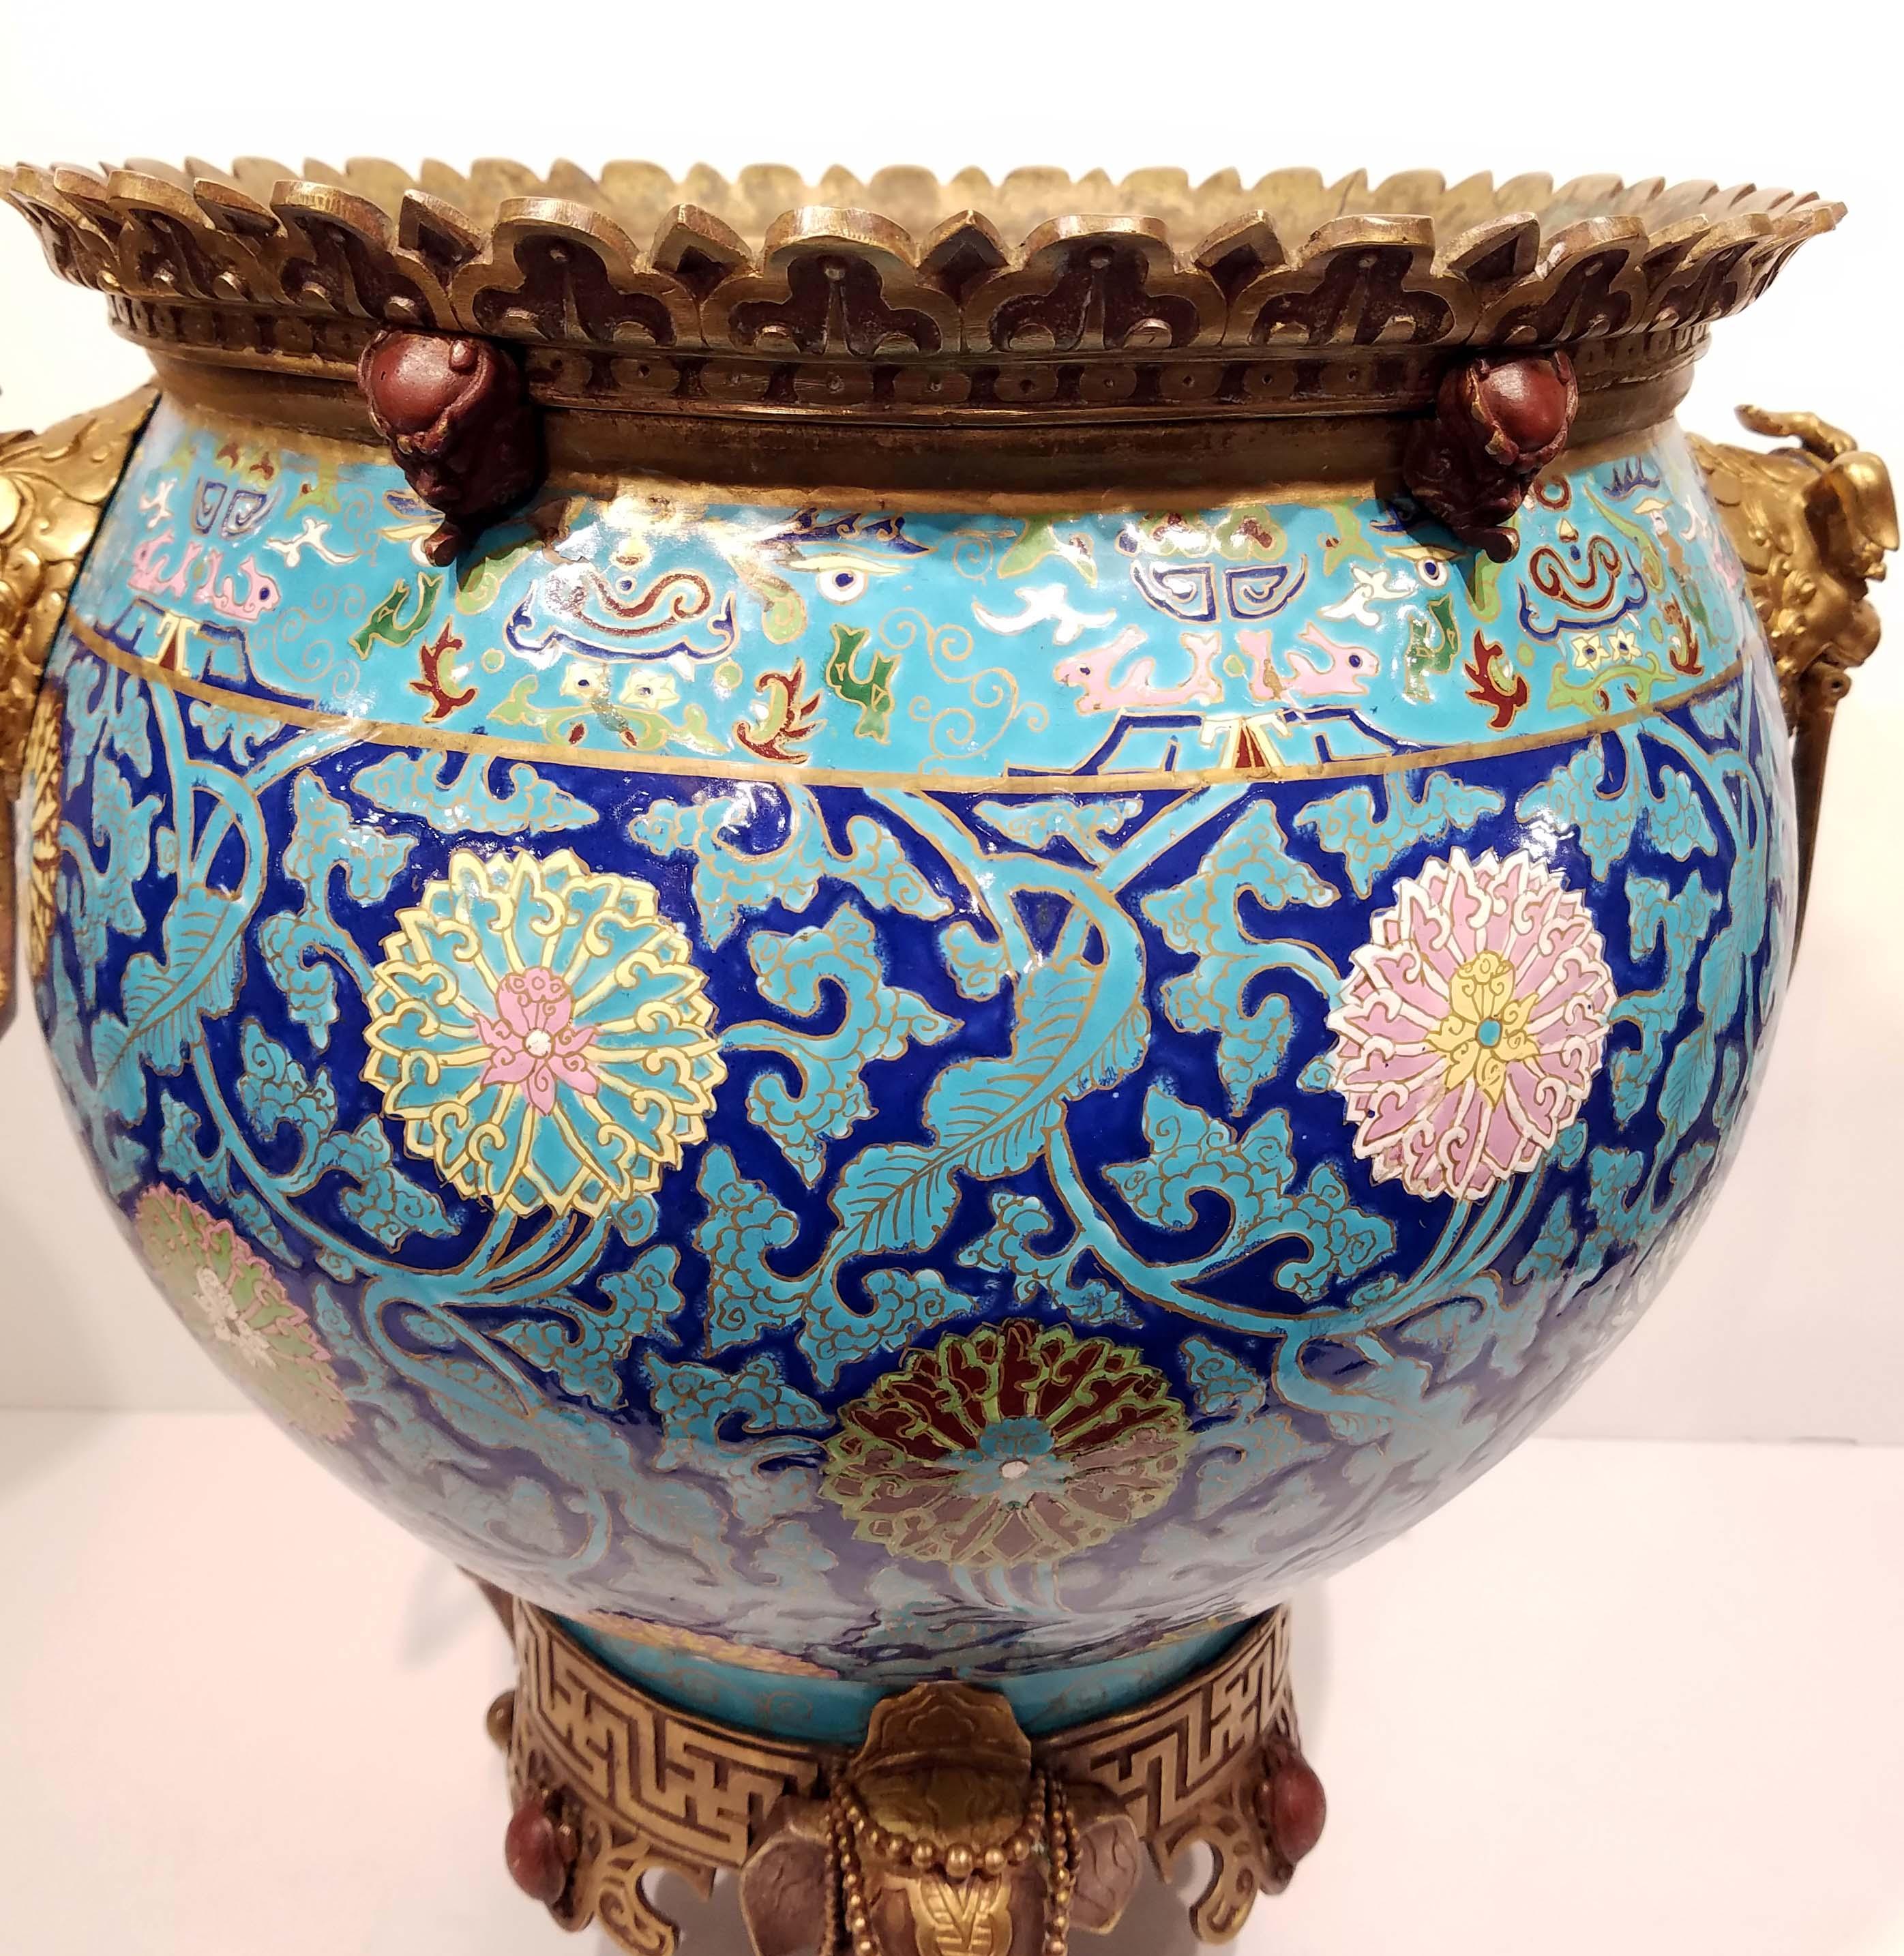 A massive jardinière/ planter attributed to Escalier De crystal, Paris, 19th century. Soft paste porcelain with gilt and polychromed bronze mounts of elephants, turtle and foodogs in the style of Chinese cloisonné from Ming dynasty. Measures: